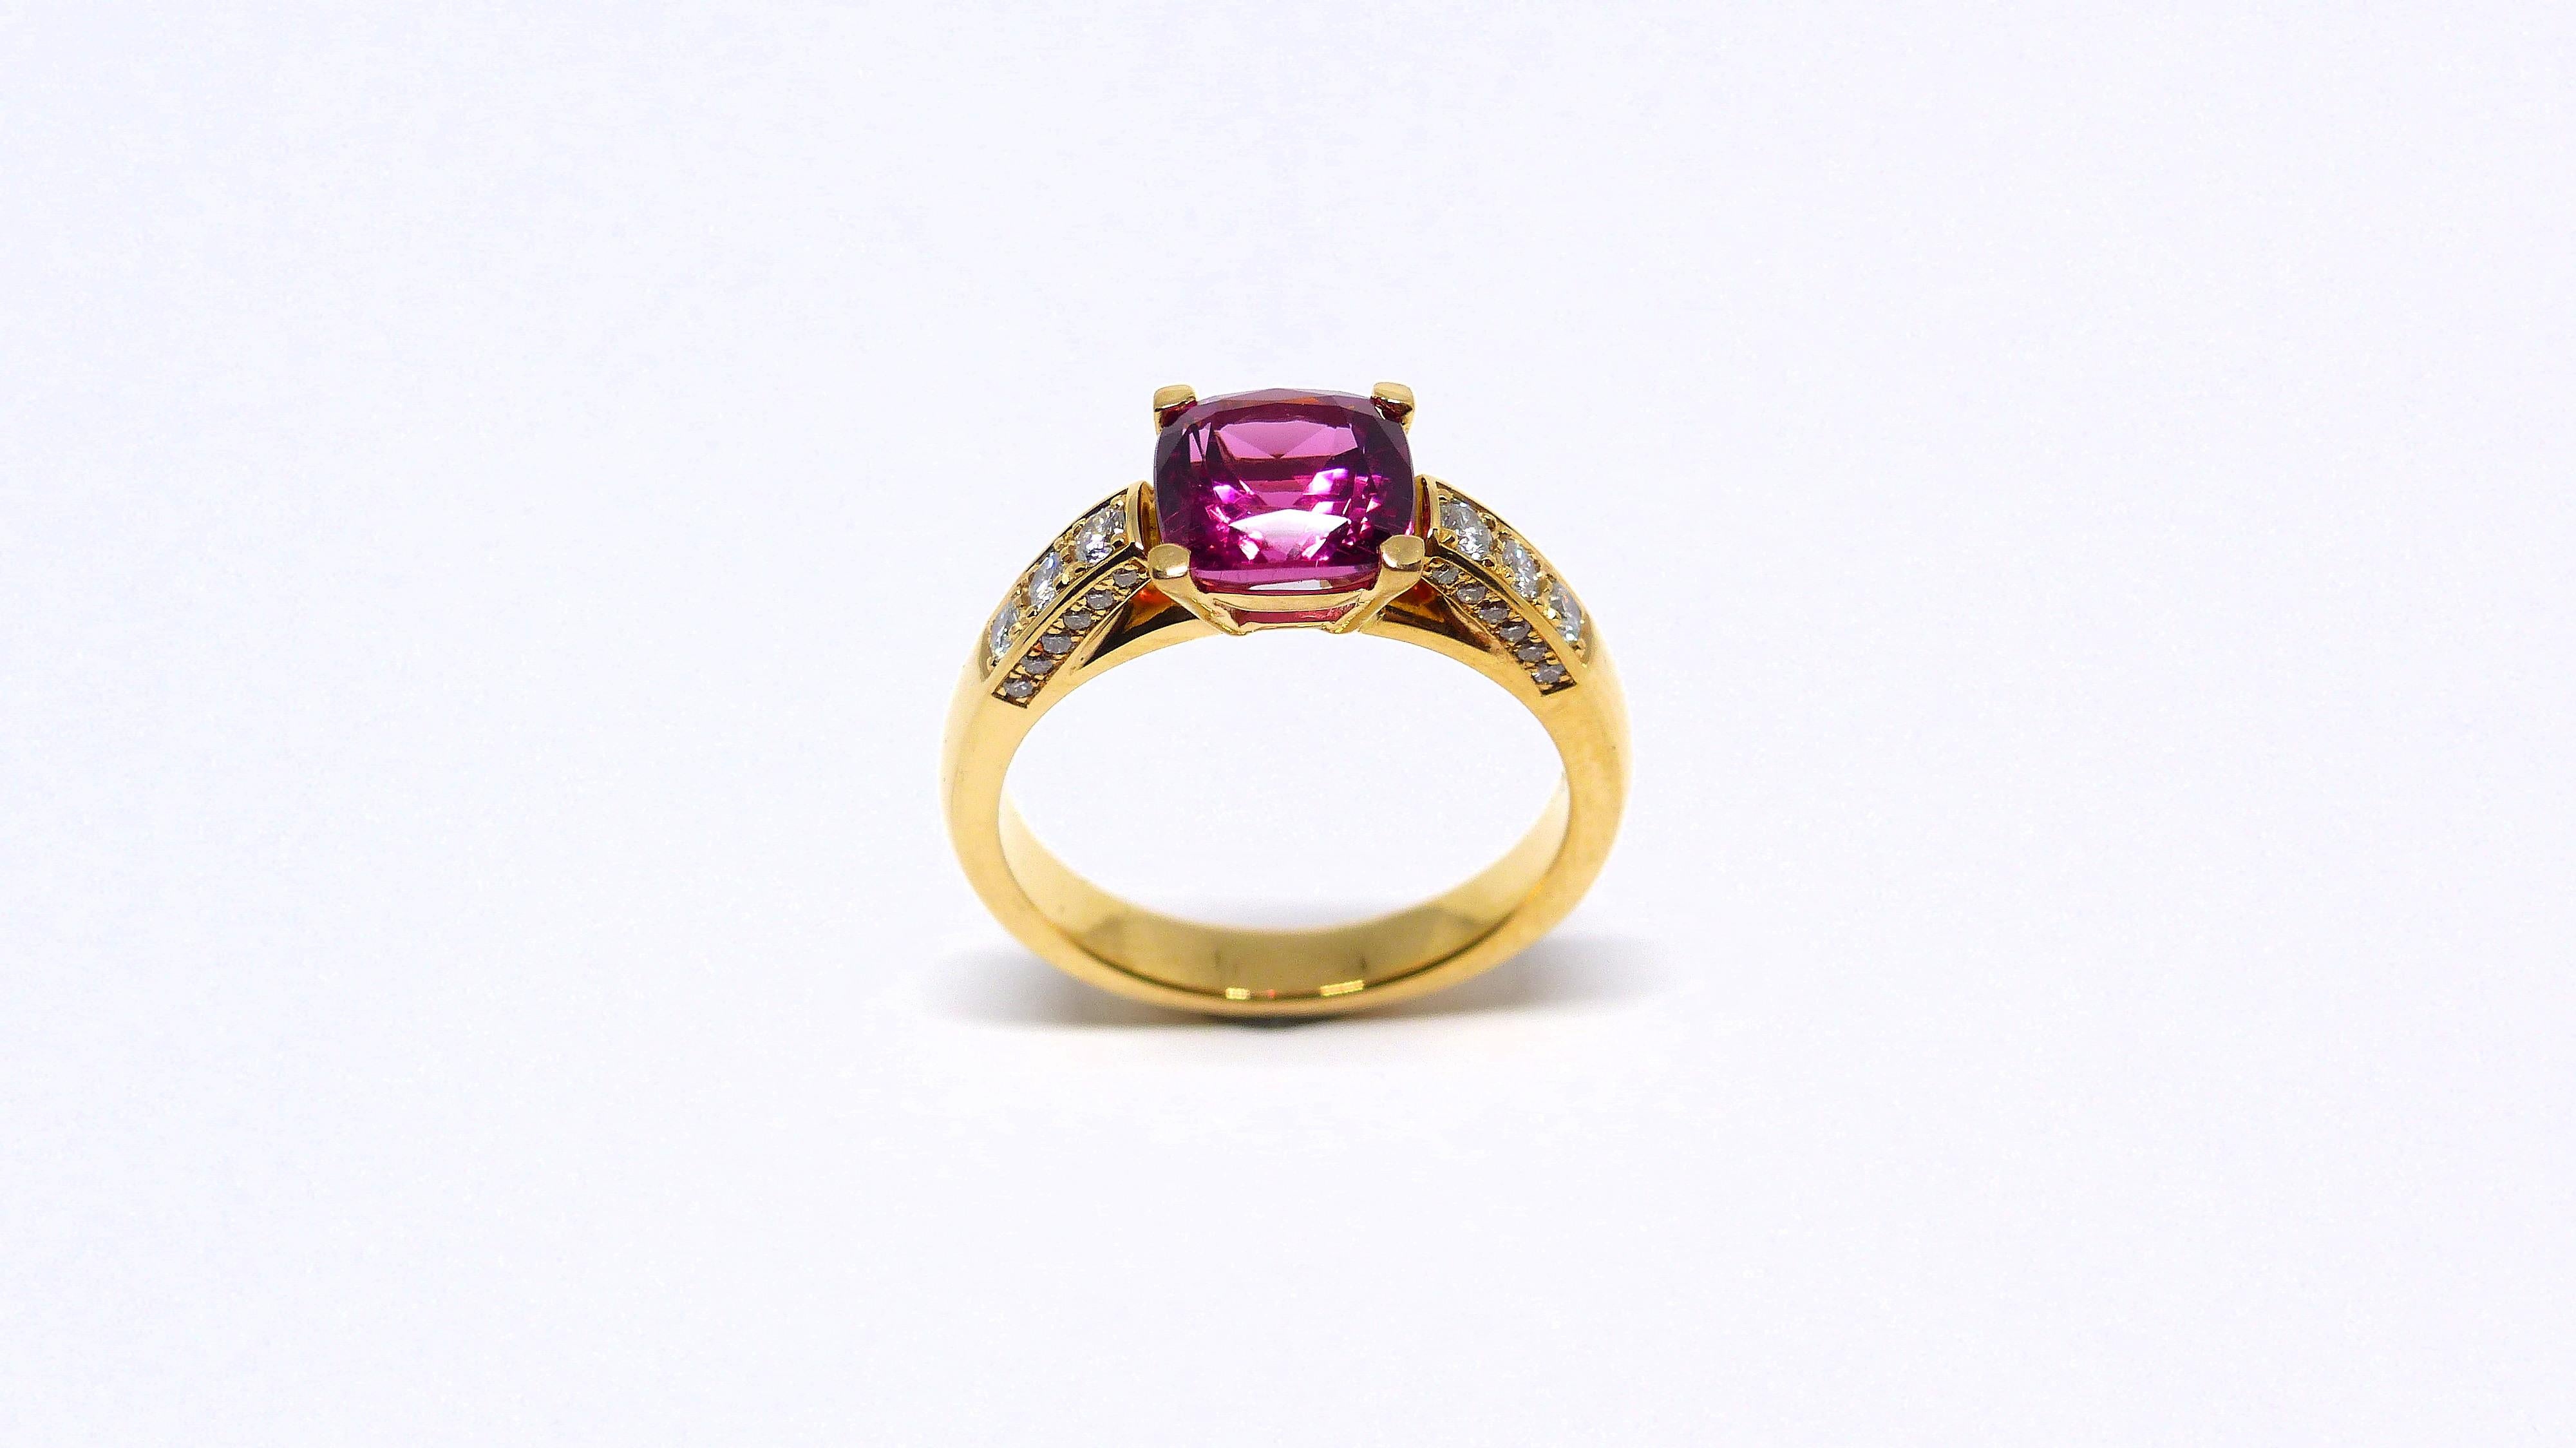 Thomas Leyser is renowned for his contemporary jewellery designs utilizing fine gemstones. 

This 18k rose gold (7.17g) ring is set with 1x fine Rubellite (facetted, cushion, 8.5mm, 2.51ct) + 26x Diamonds (brillant-cut, 1-2mm, G(VS, 0.32ct).